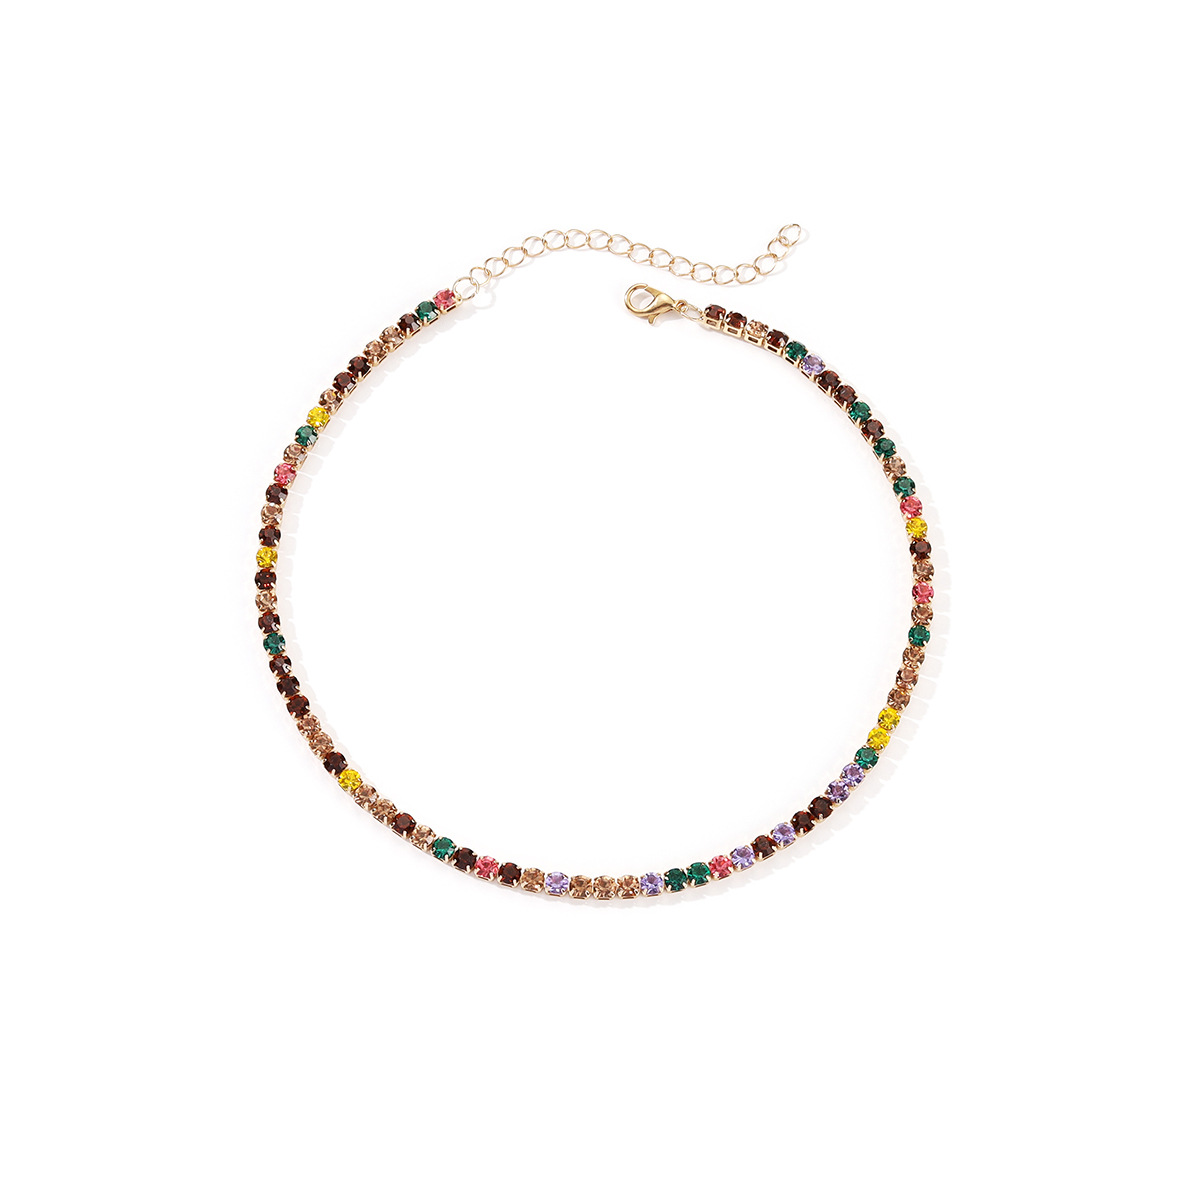 Colorful gold necklace